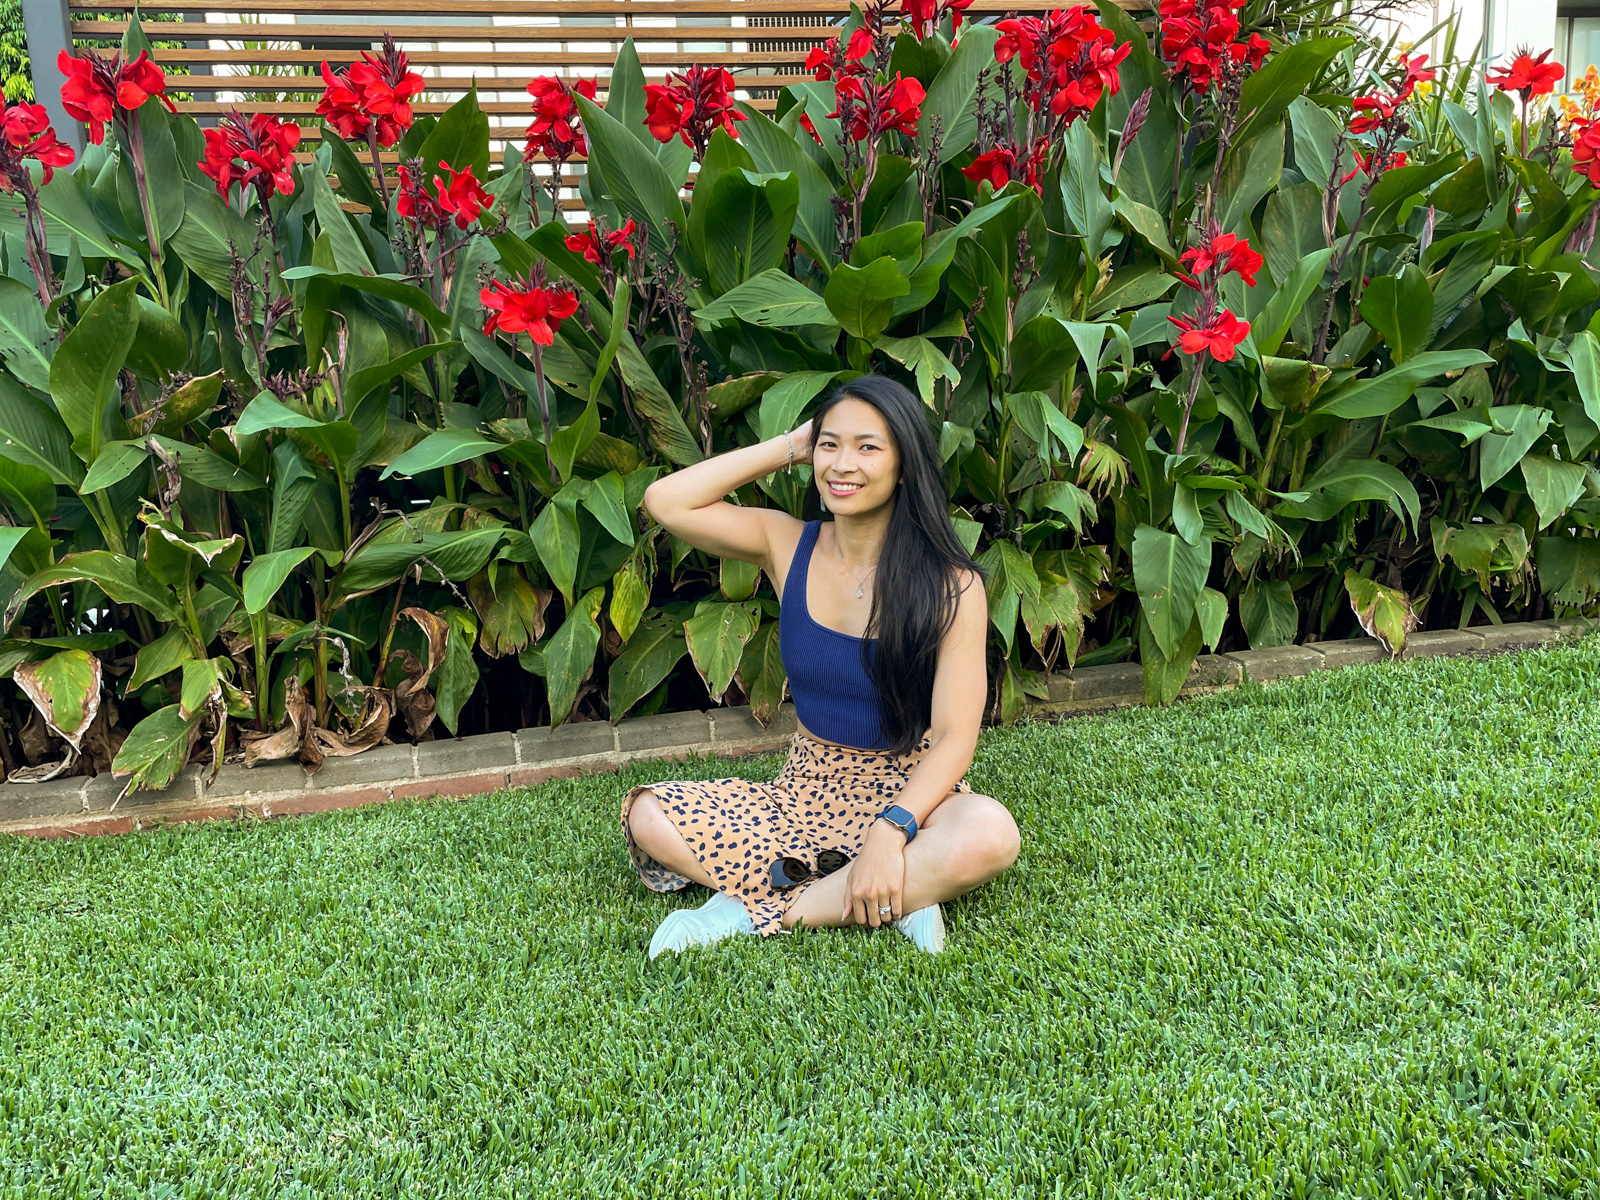 An Asian woman with long dark hair, wearing a long tan coloured midi skirt with a dark animal print, and a fitted blue top. She is sitting on freshly mowed green grass with a hand touching her hair as her elbow is bent. There are red flowers in the green plants behind her.